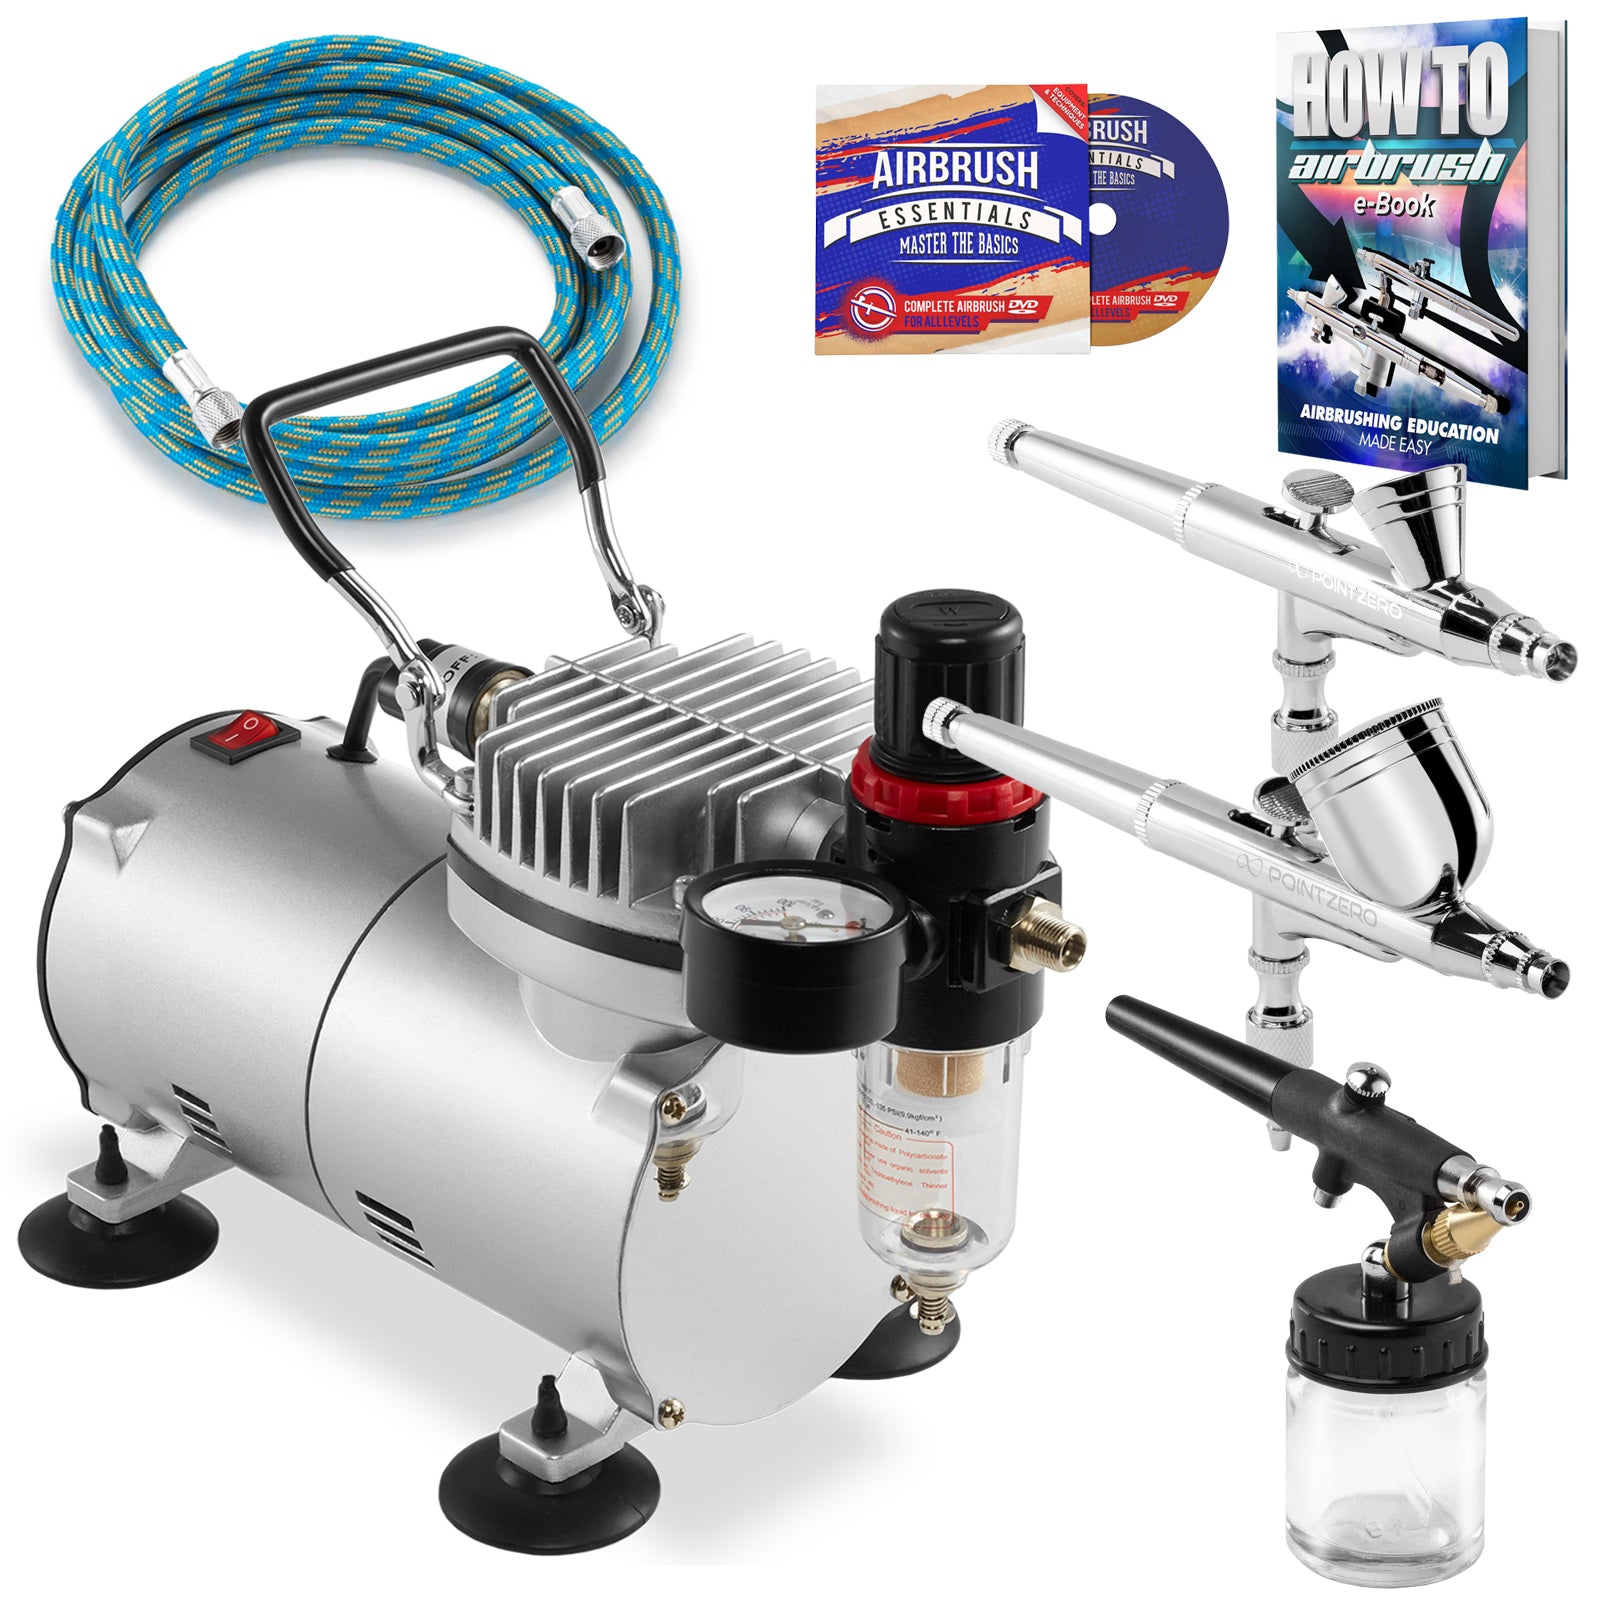 Airbrush Kit with 1/5 HP Air Compressor and 1 Dual Action Airbrush Kit